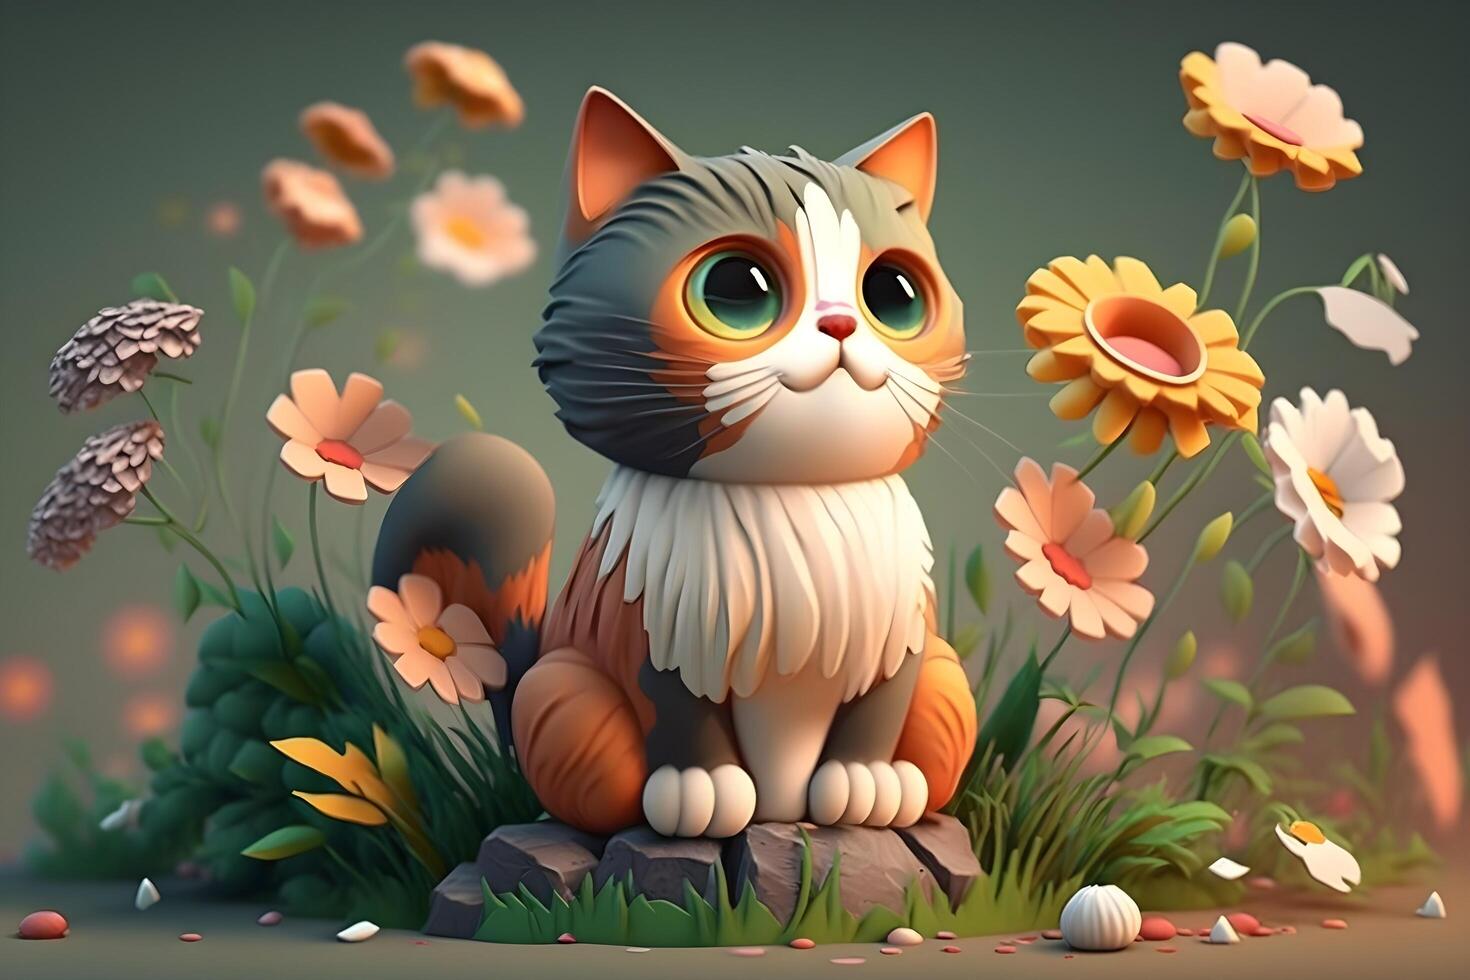 animated cat with flowers around created by teknology photo